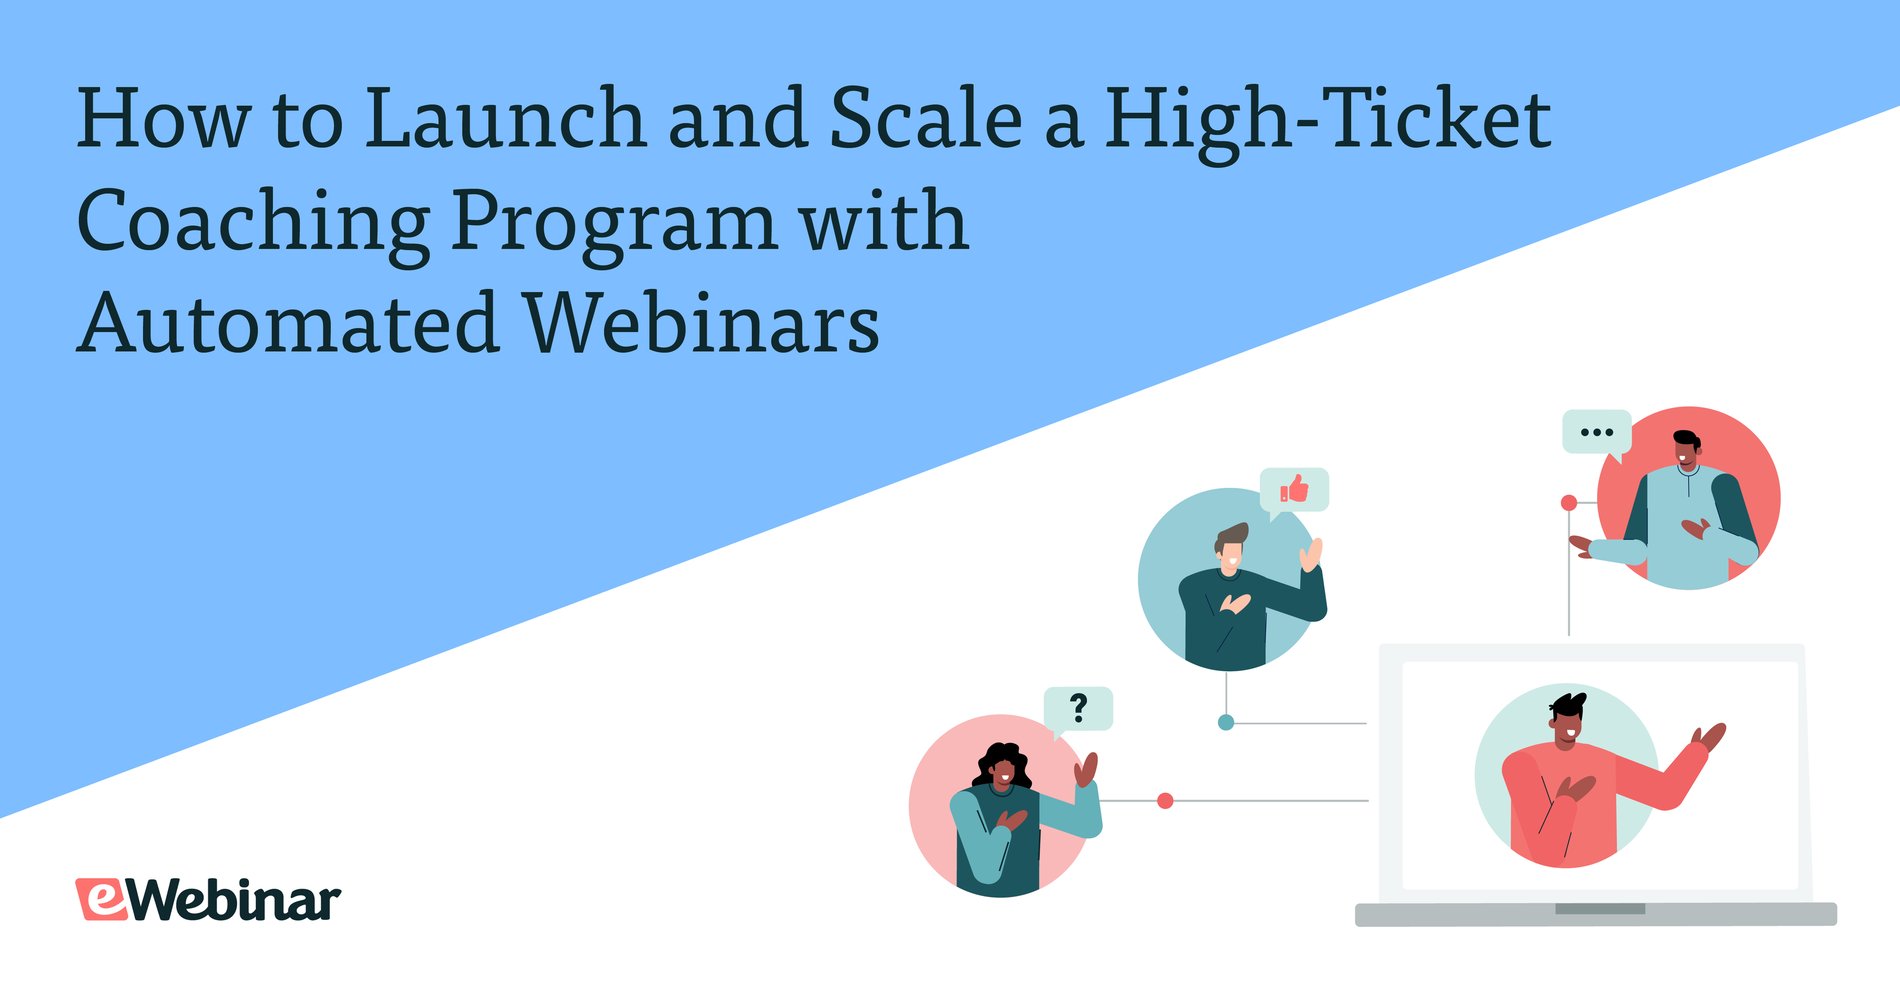 How to Launch and Scale a High-Ticket Coaching Program with Automated Webinars